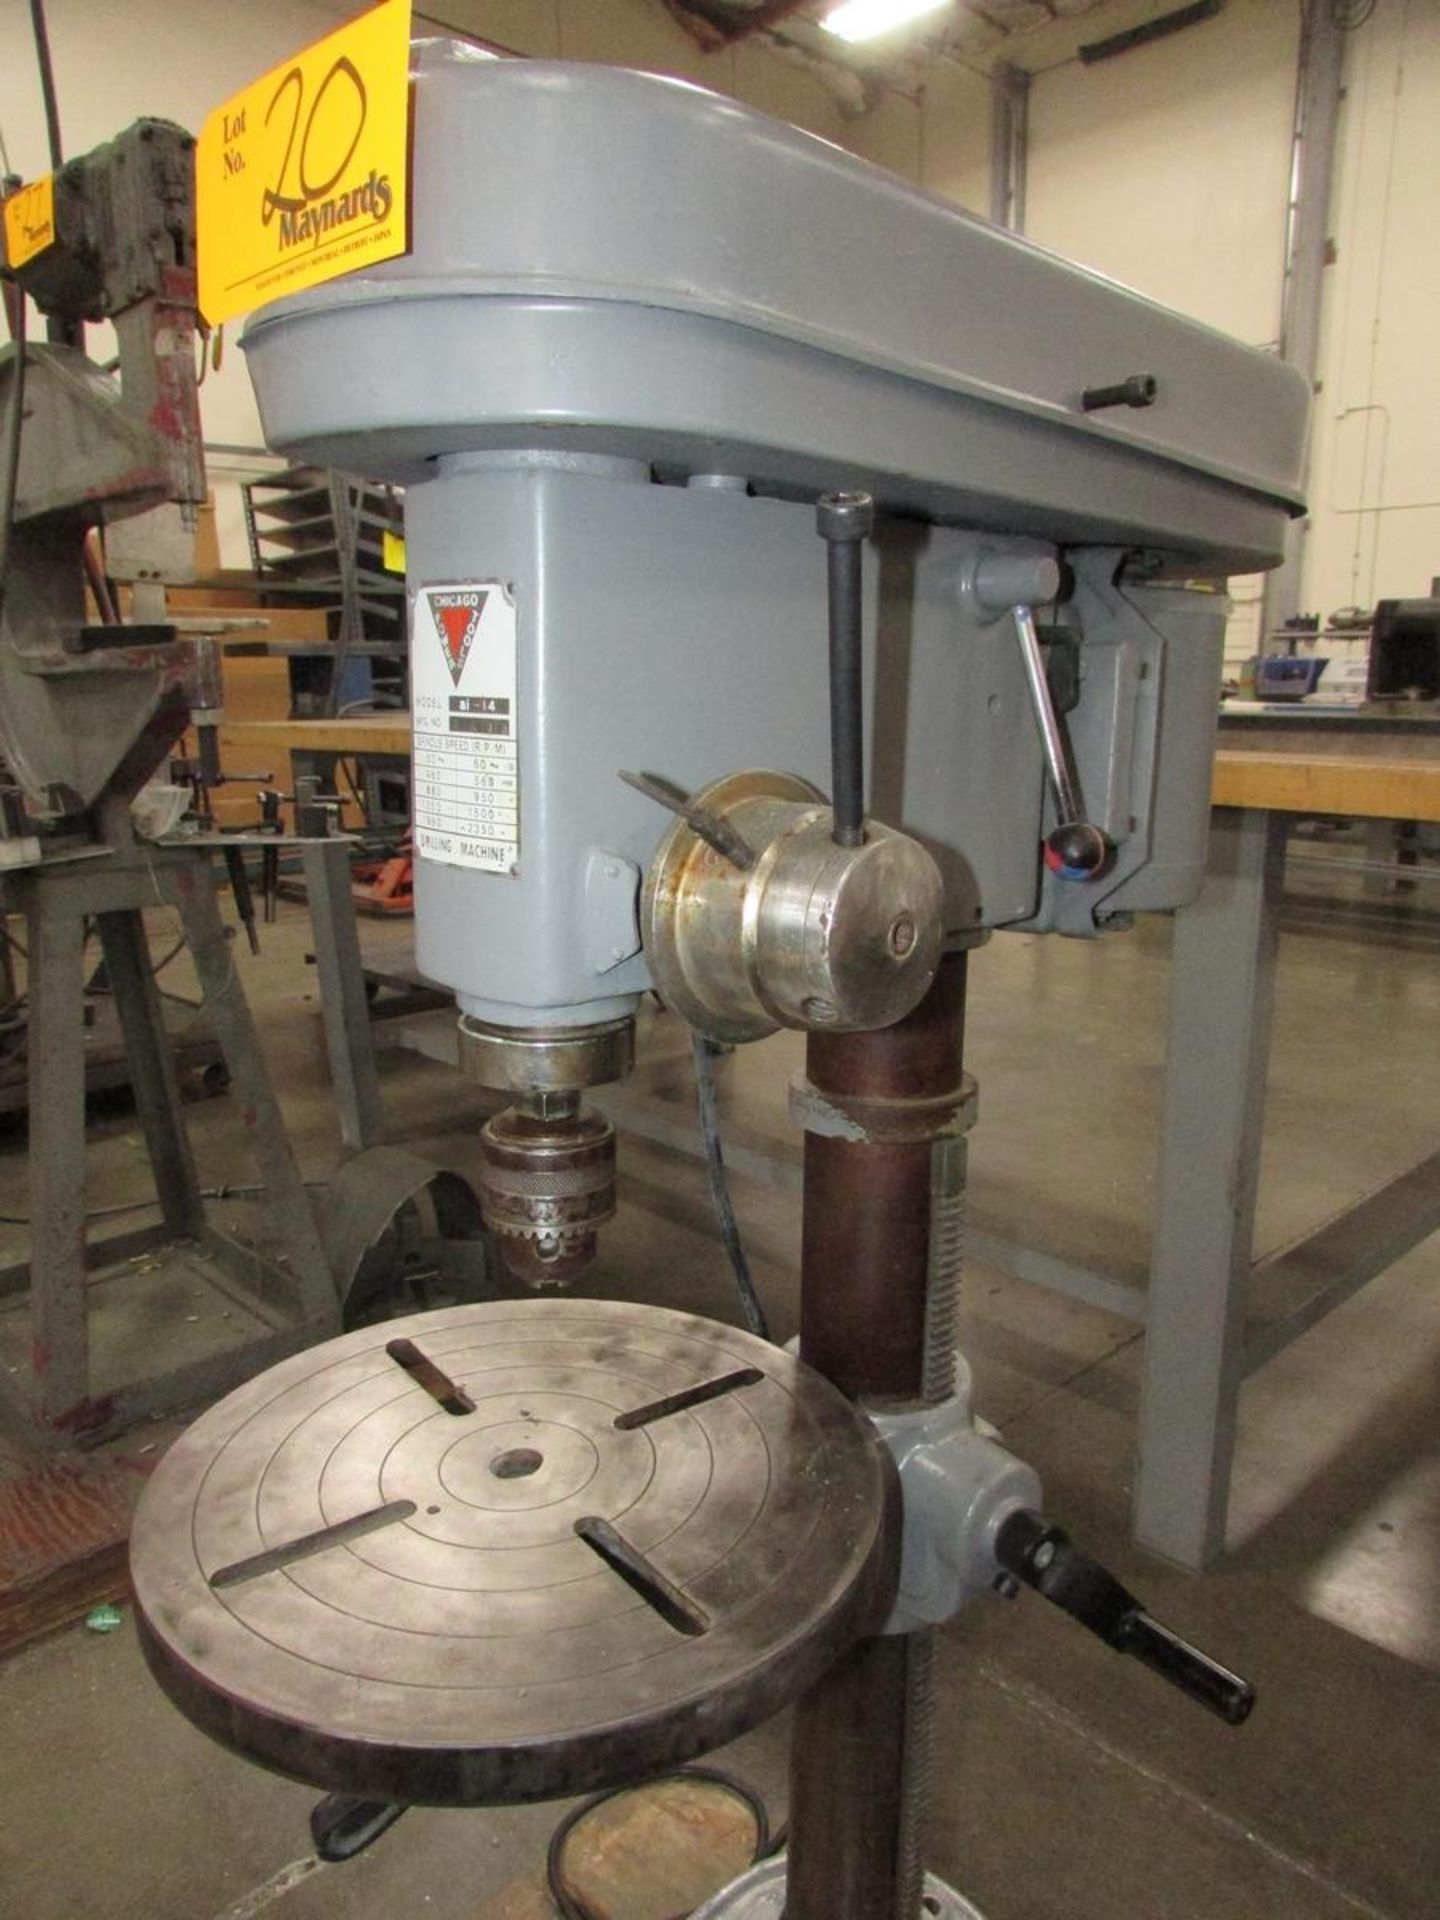 Chicago Power Tools 14" Benchtop Drill Press - Image 3 of 8